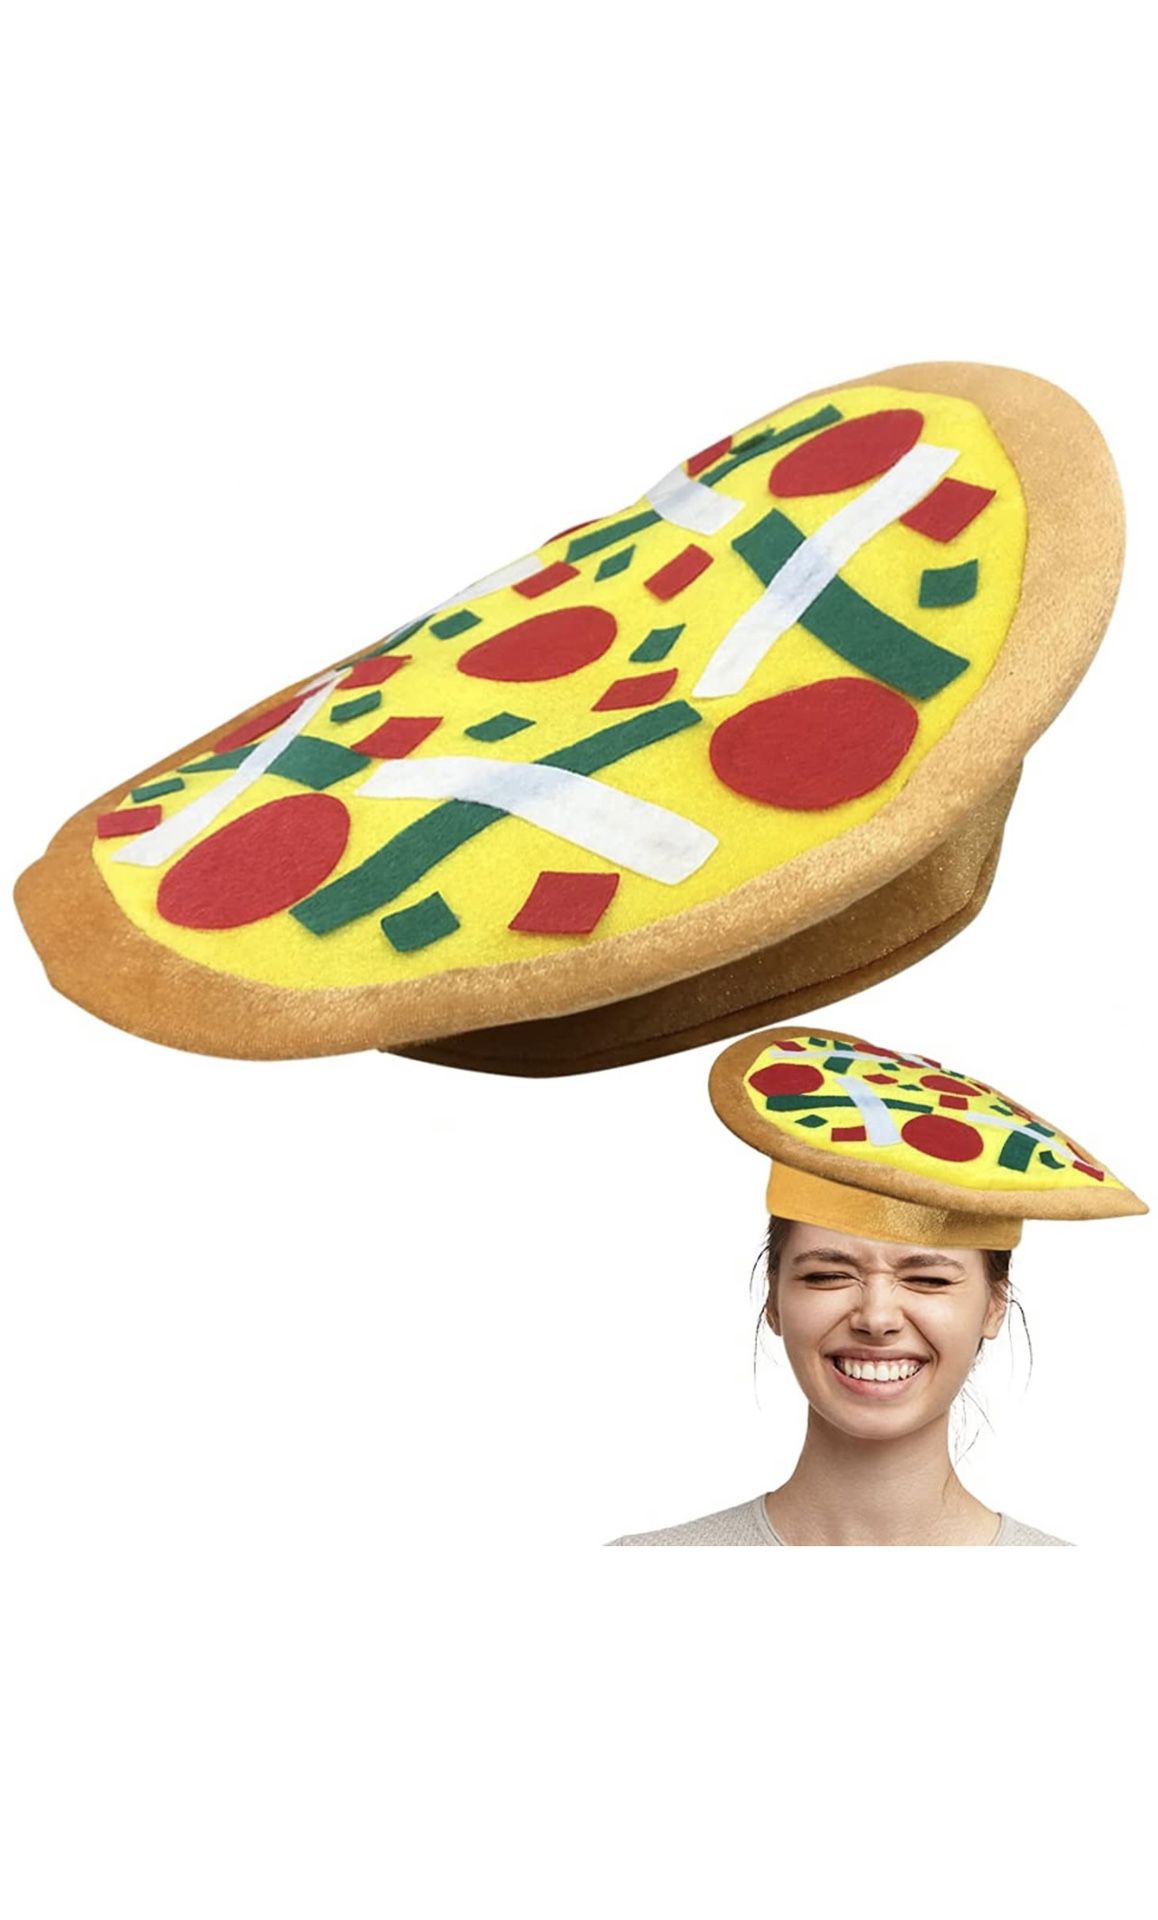 Funny Pizza Hat, 1 PC, Fun Halloween Costume Accessory, Pizza Party Supplies Decorations,